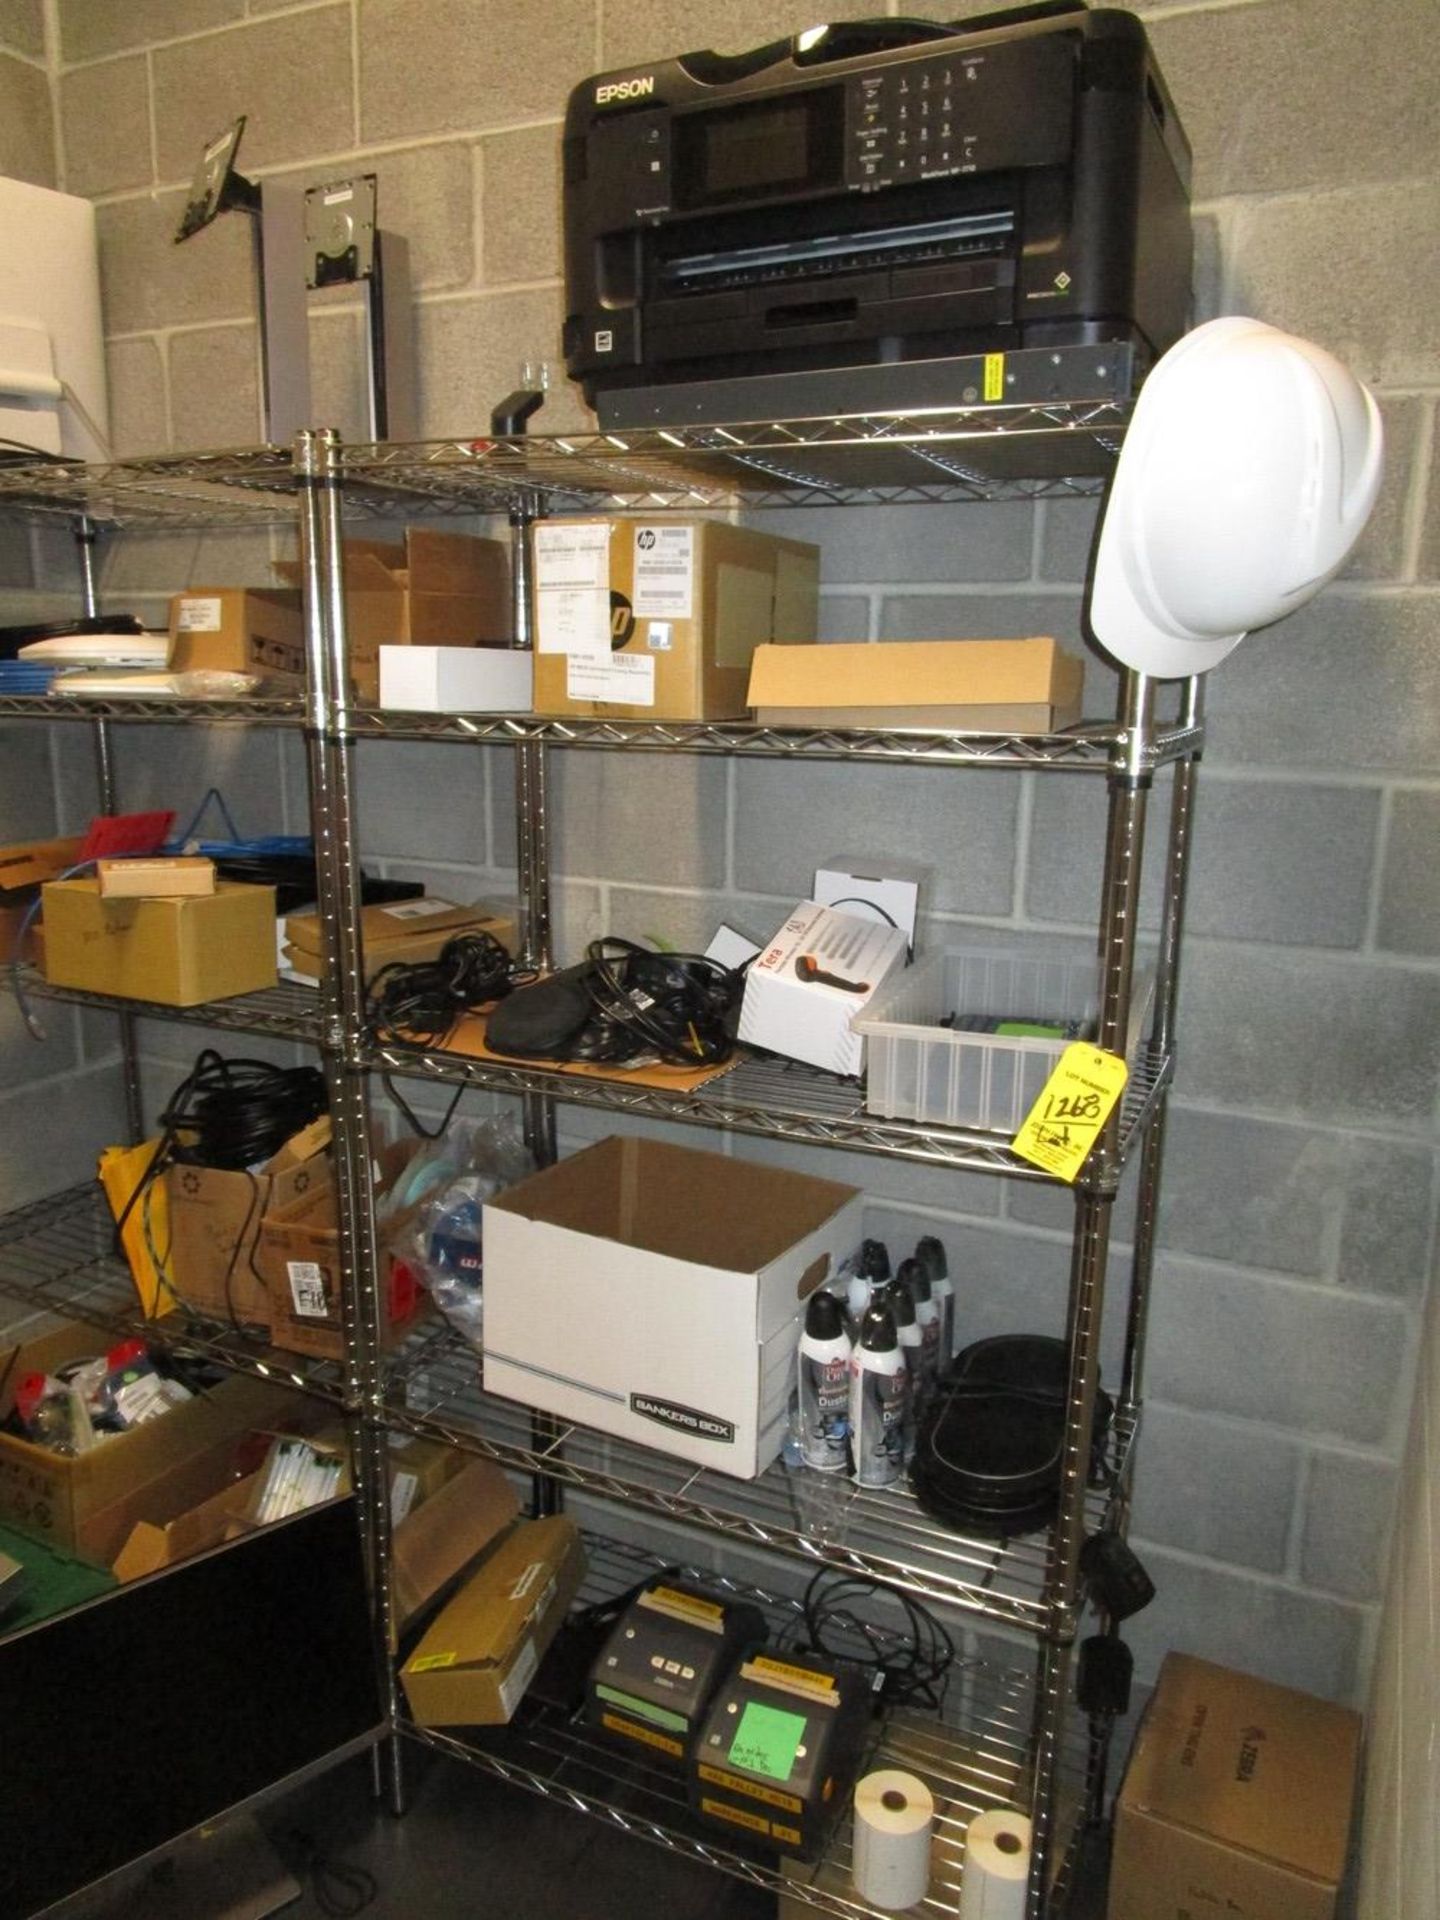 Entire Contents of Tech. Closet with Wire Shelving | Rig Fee: $75 - Image 4 of 4